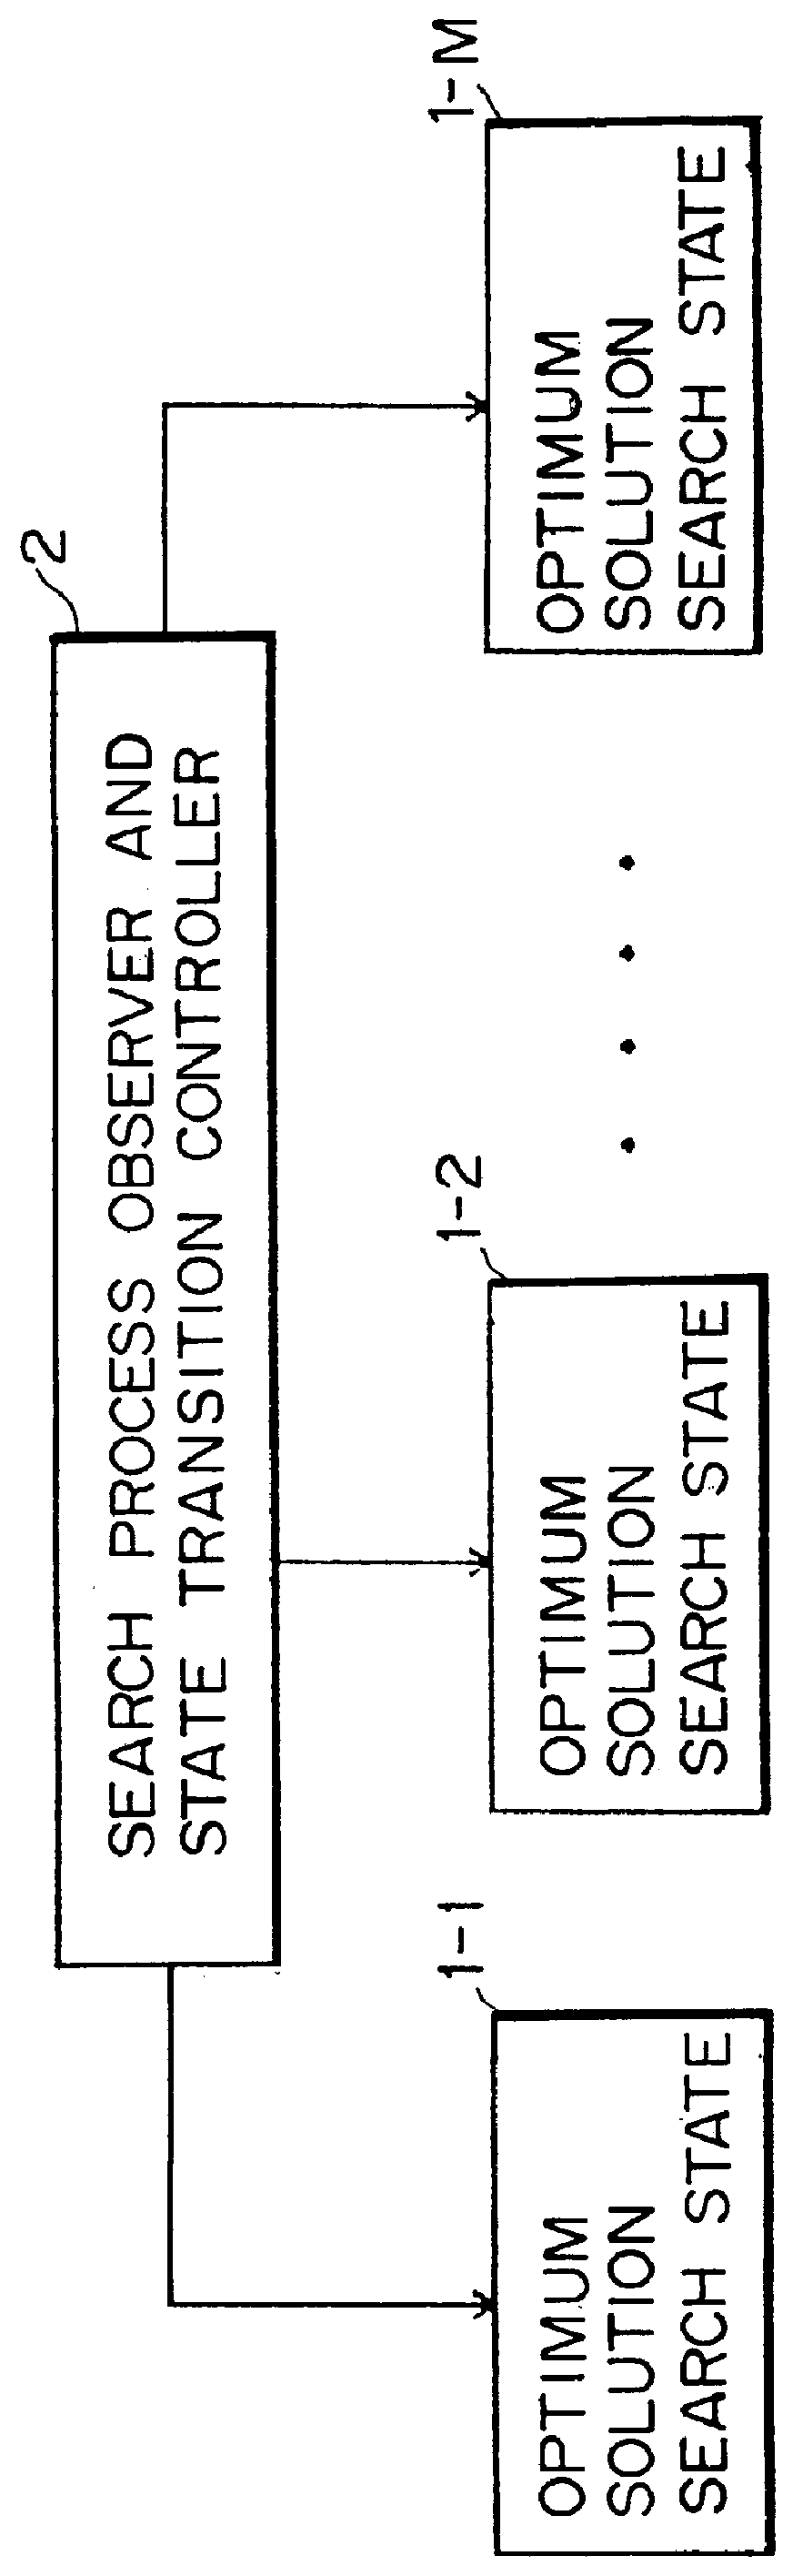 Problem solving operation apparatus using a state transition